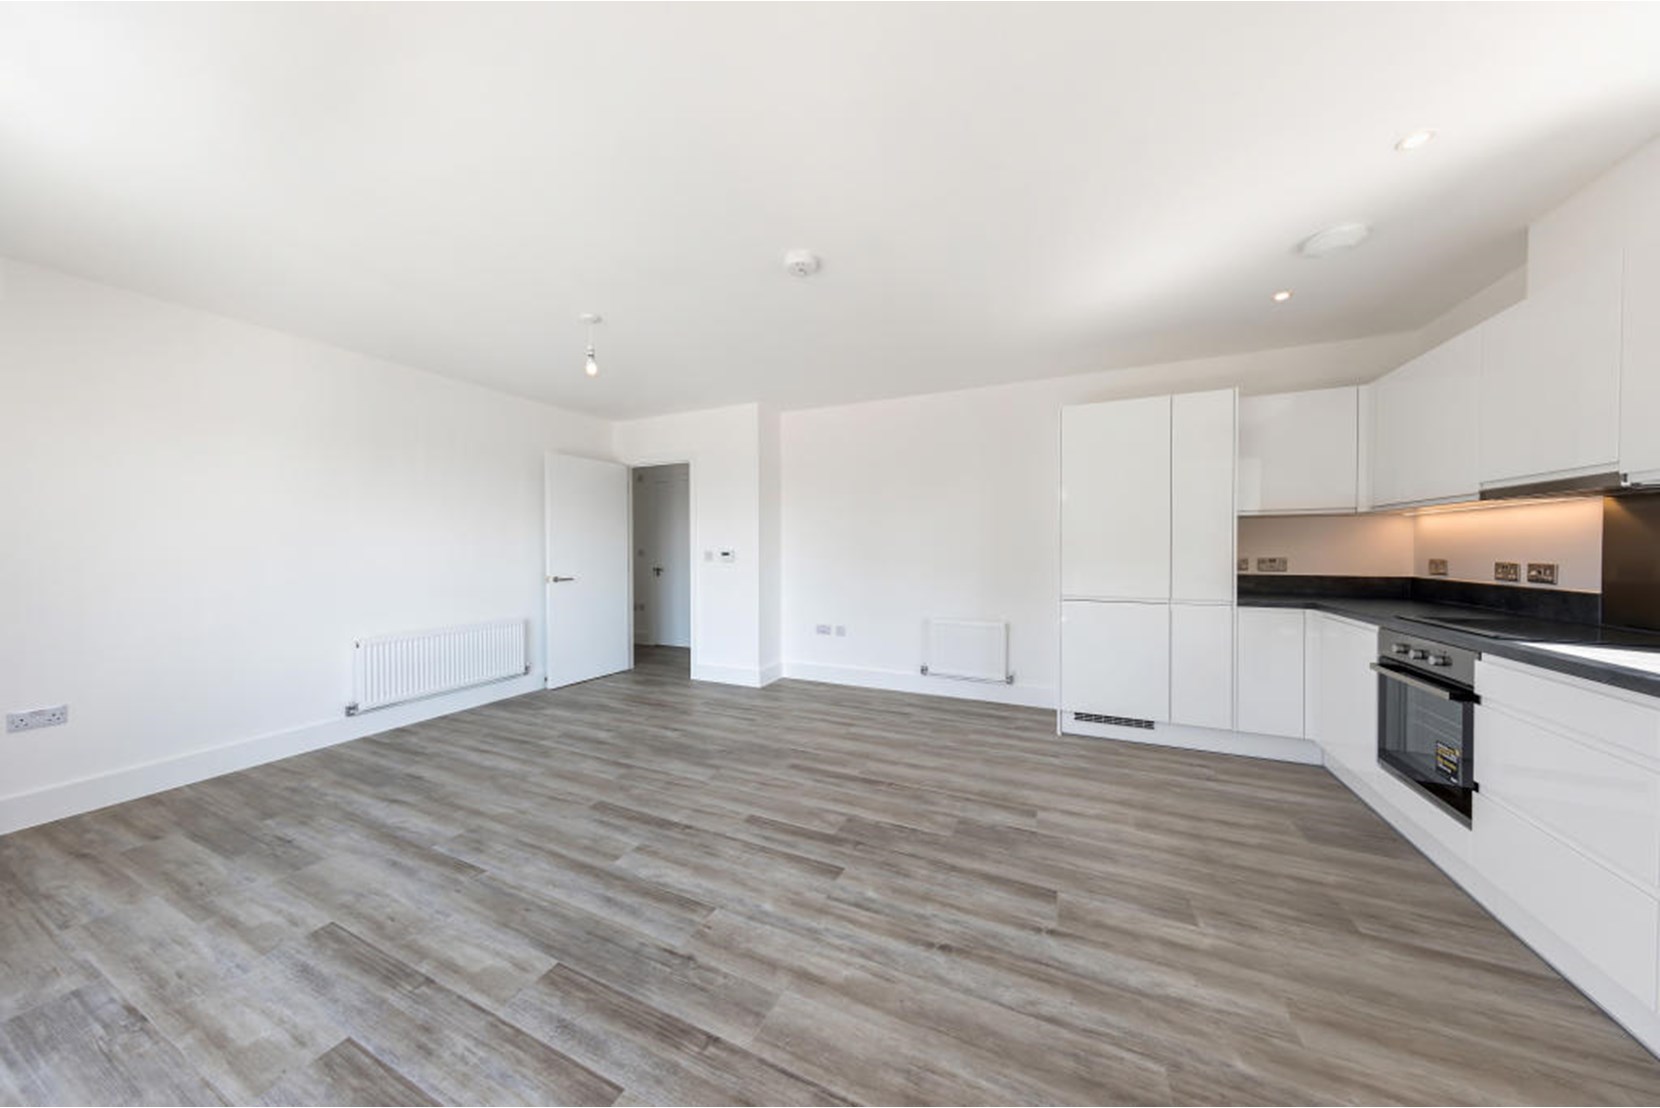 Apartments to Rent by Hera at Basalt Court, Romford, RM7, living kitchen area